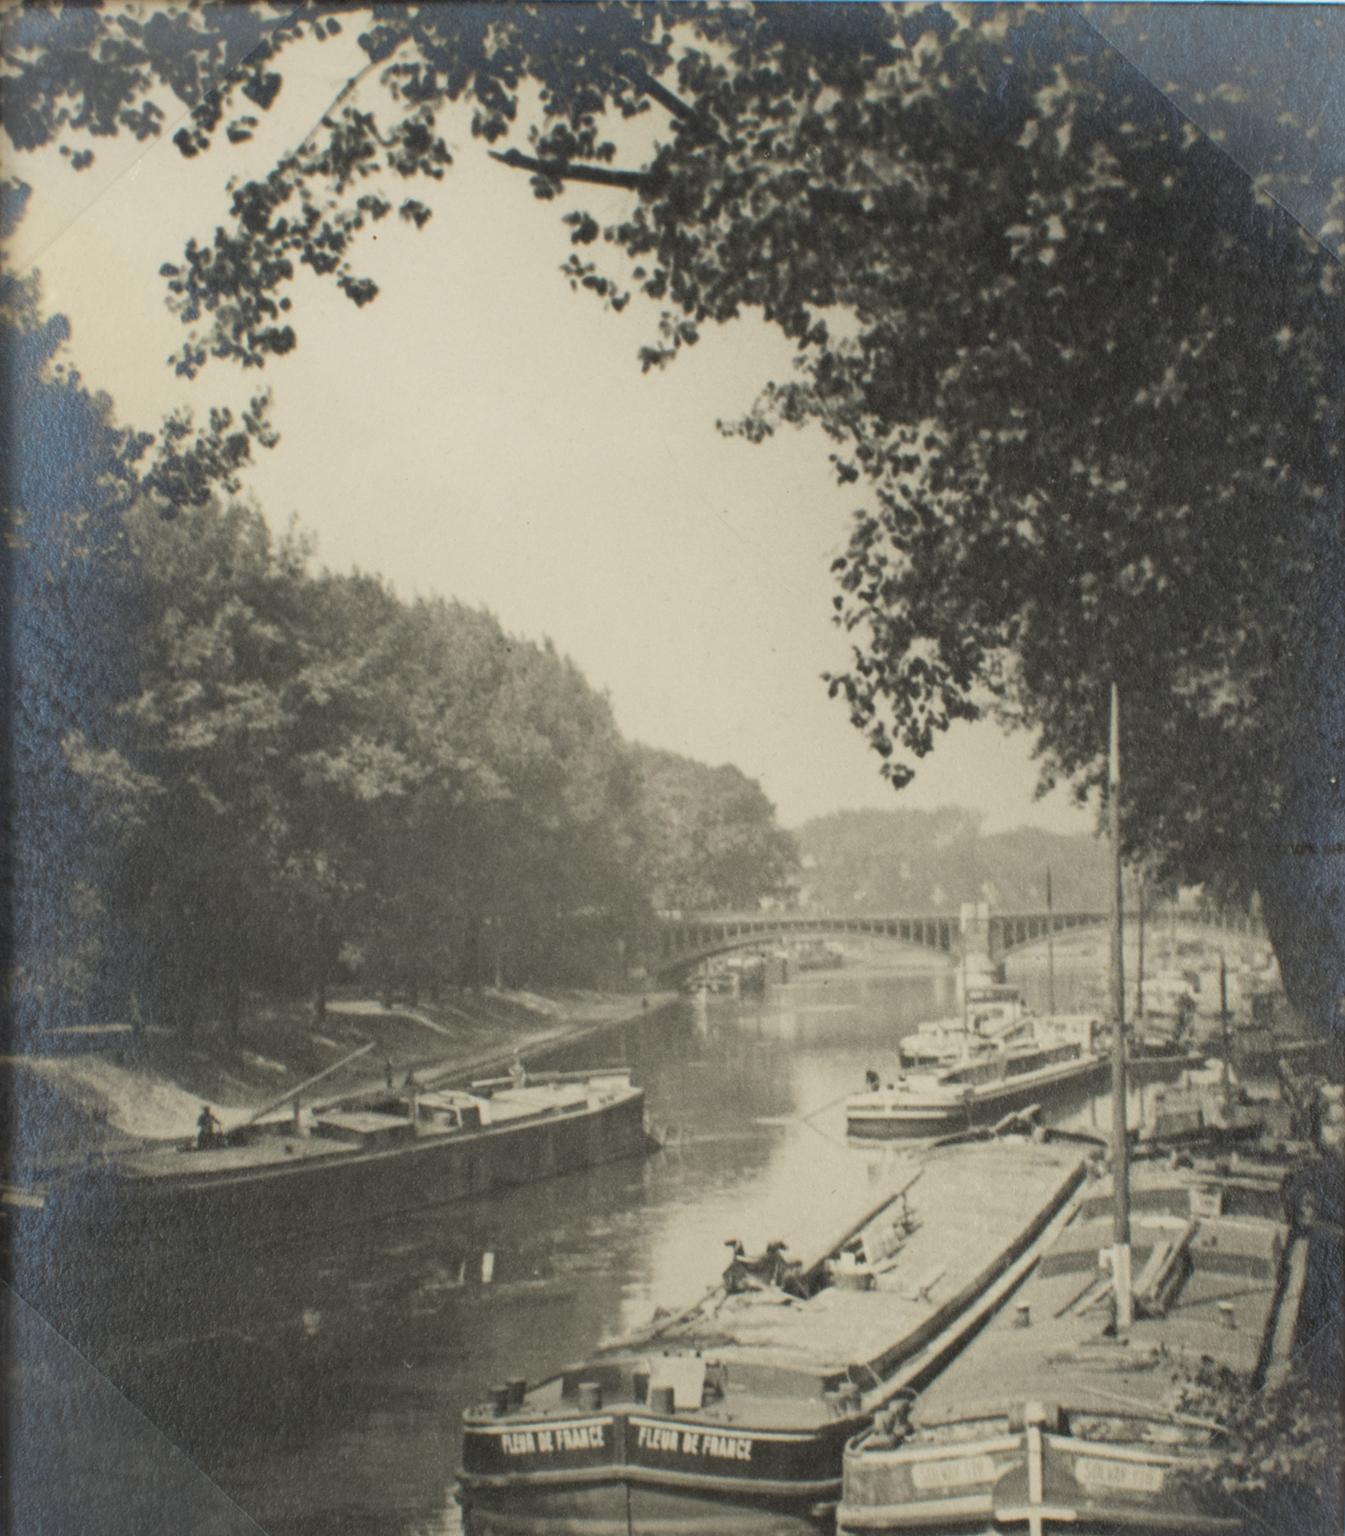 The Seine and Barges near Paris in 1926, Silver Gelatin B and W Photography